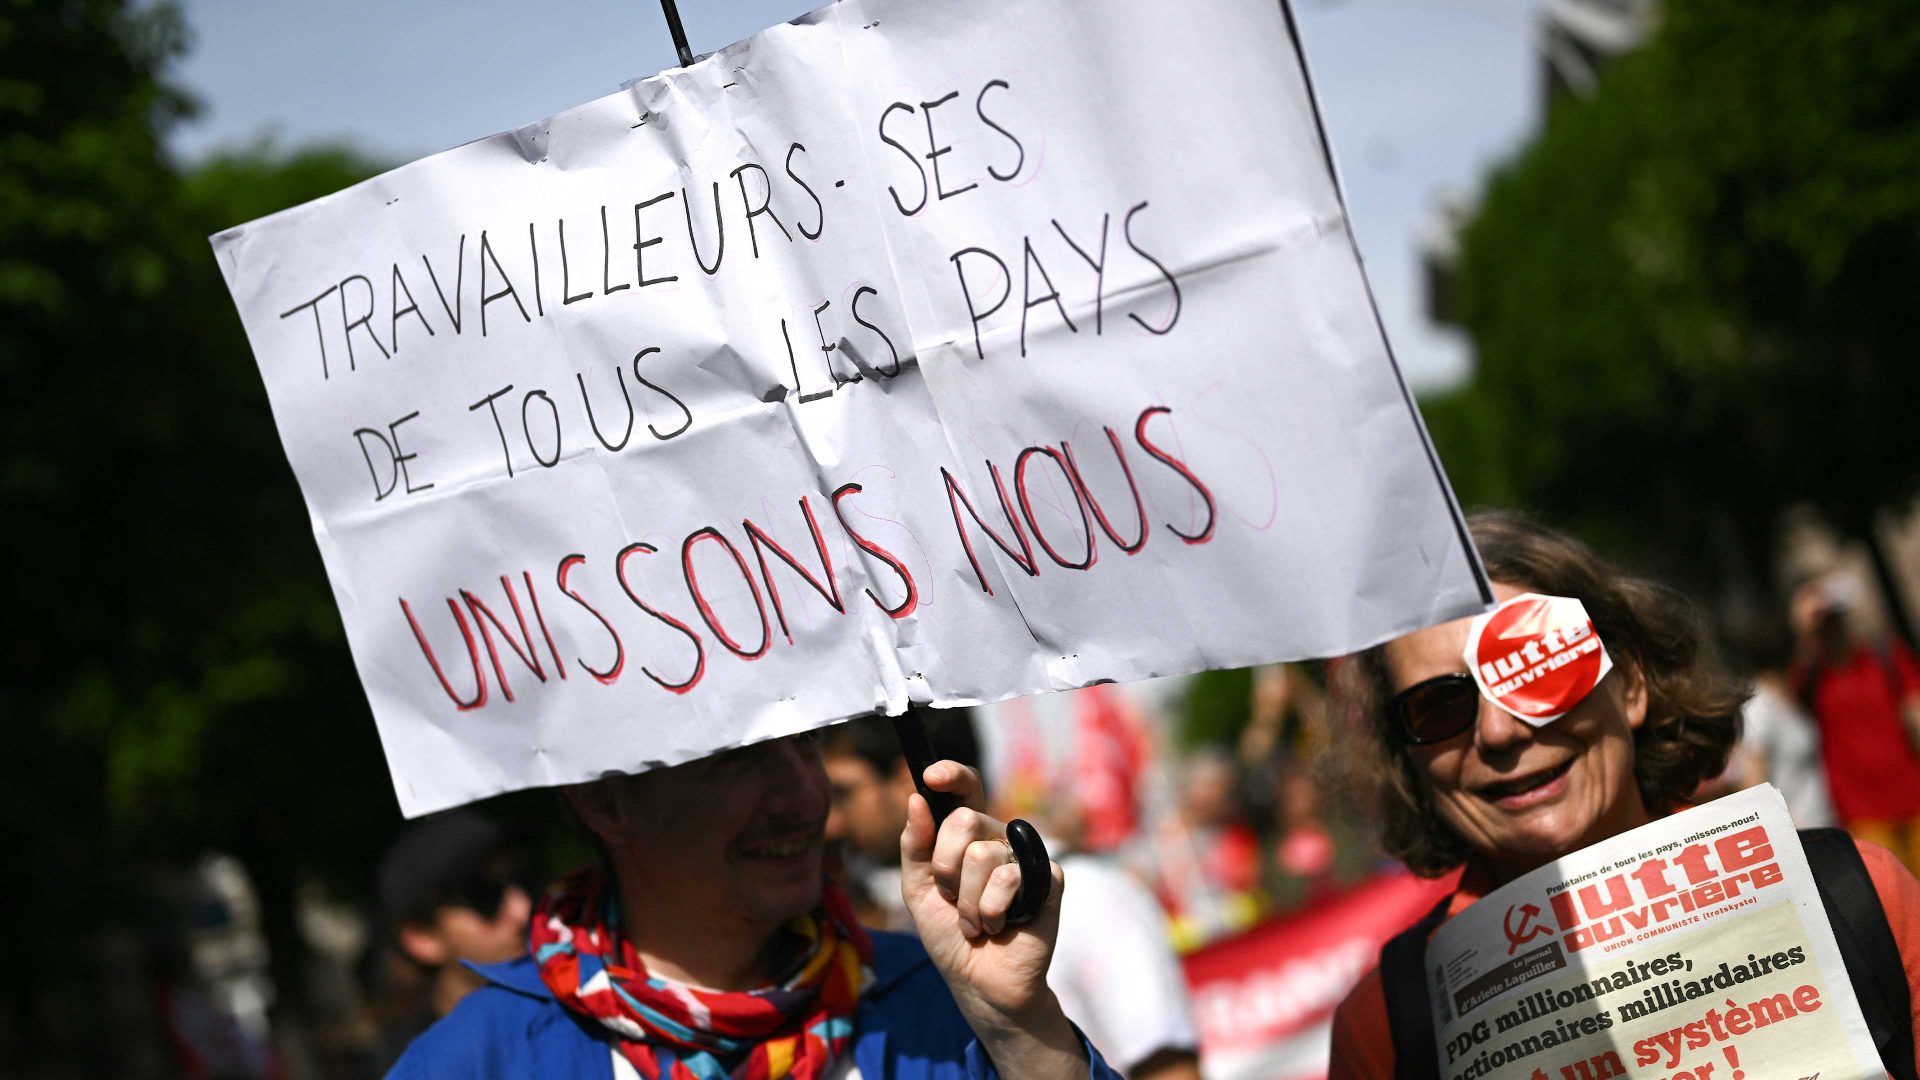 A protester holds a placard reading "Workers of the world, unite!" during a May Day (Labour Day) rally. Photo: SEBASTIEN BOZON/AFP via Getty Images